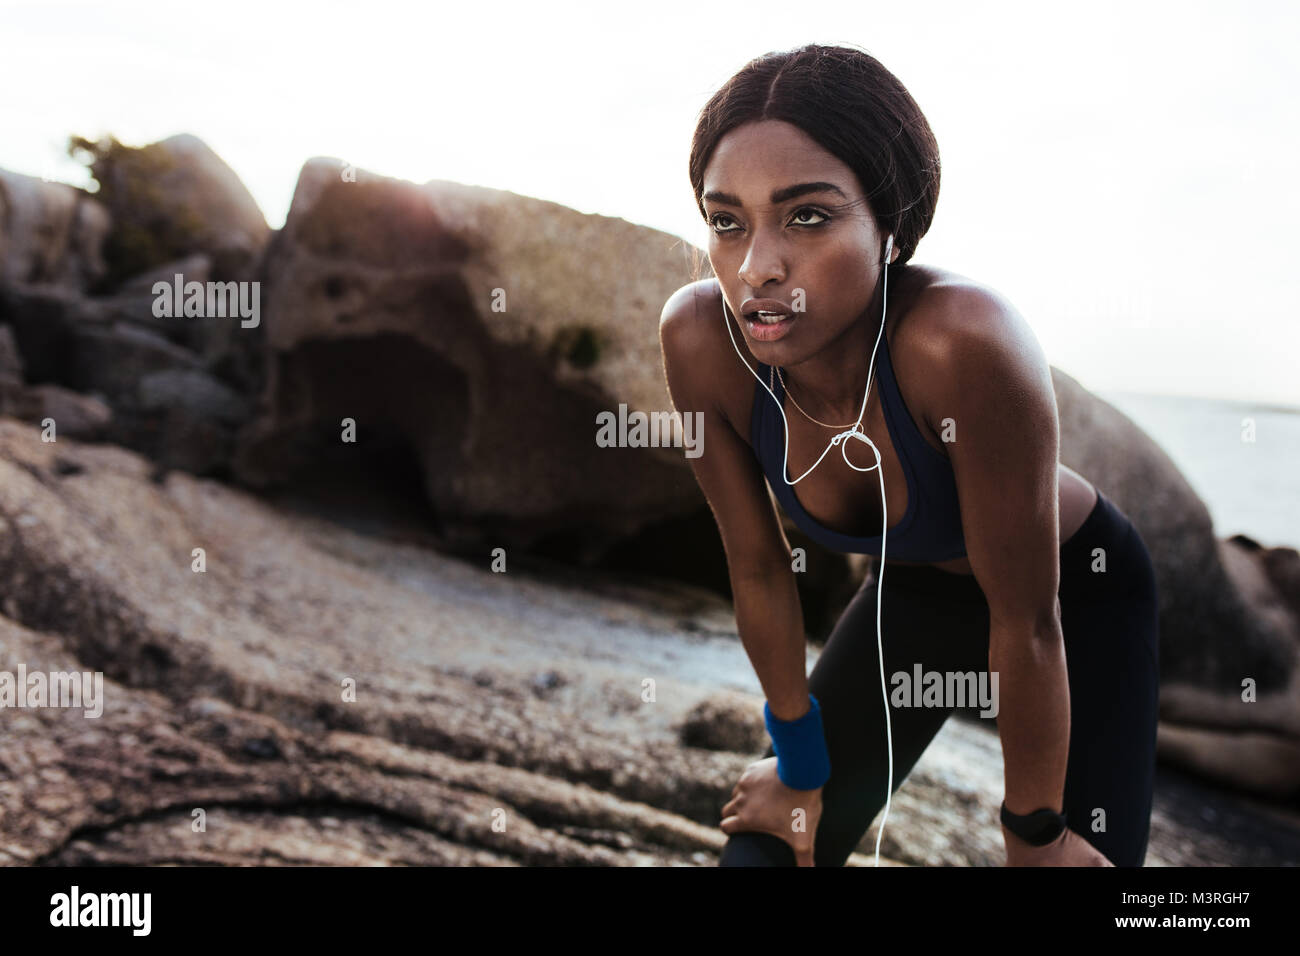 Tired young woman resting after running outdoors. African female runner standing with hands on knees. Stock Photo